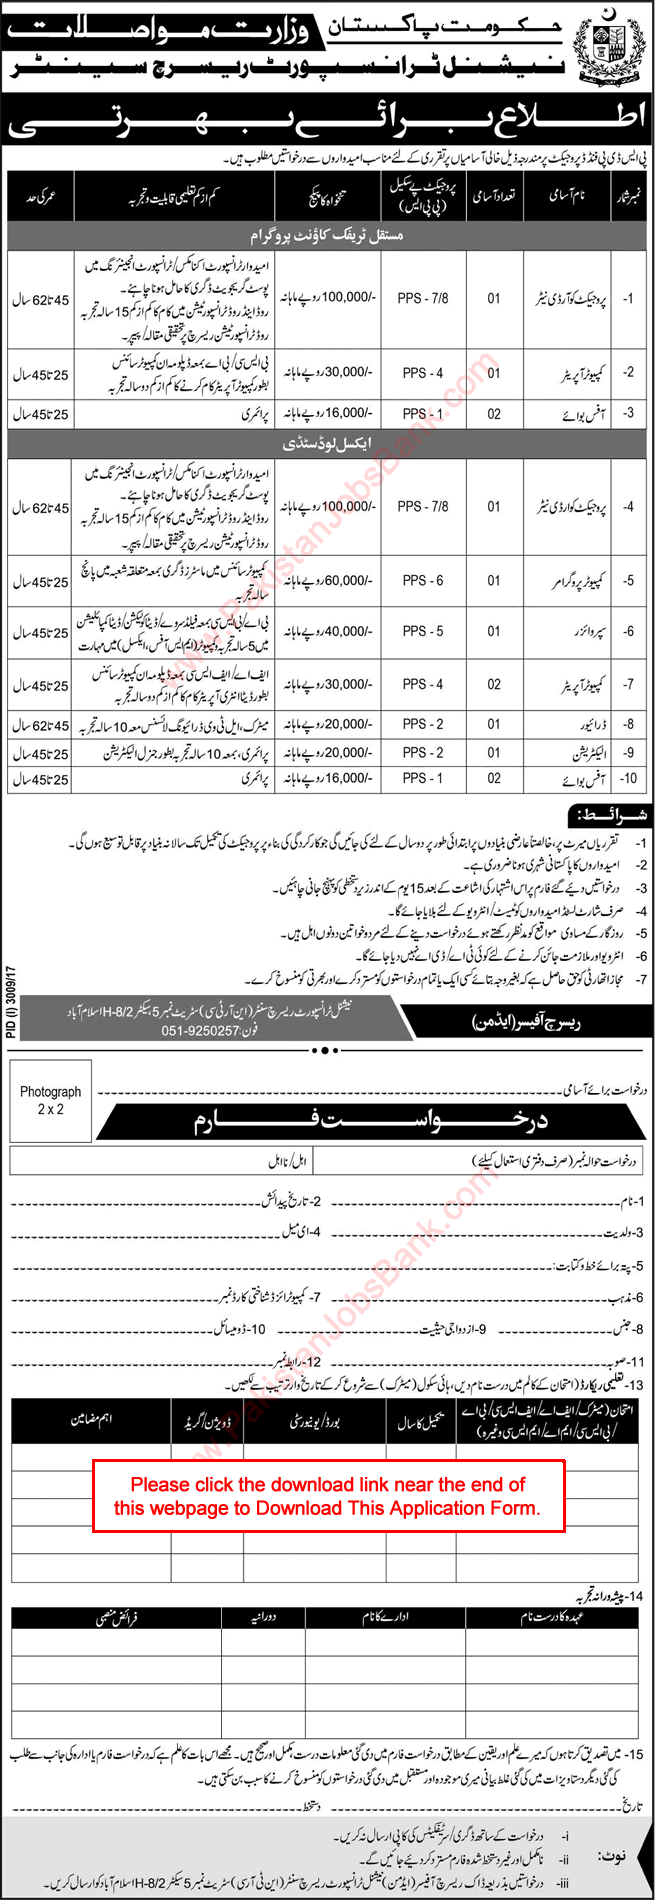 National Transport Research Centre Islamabad Jobs 2017 December NTRC Application Form Computer Operators & Others Latest